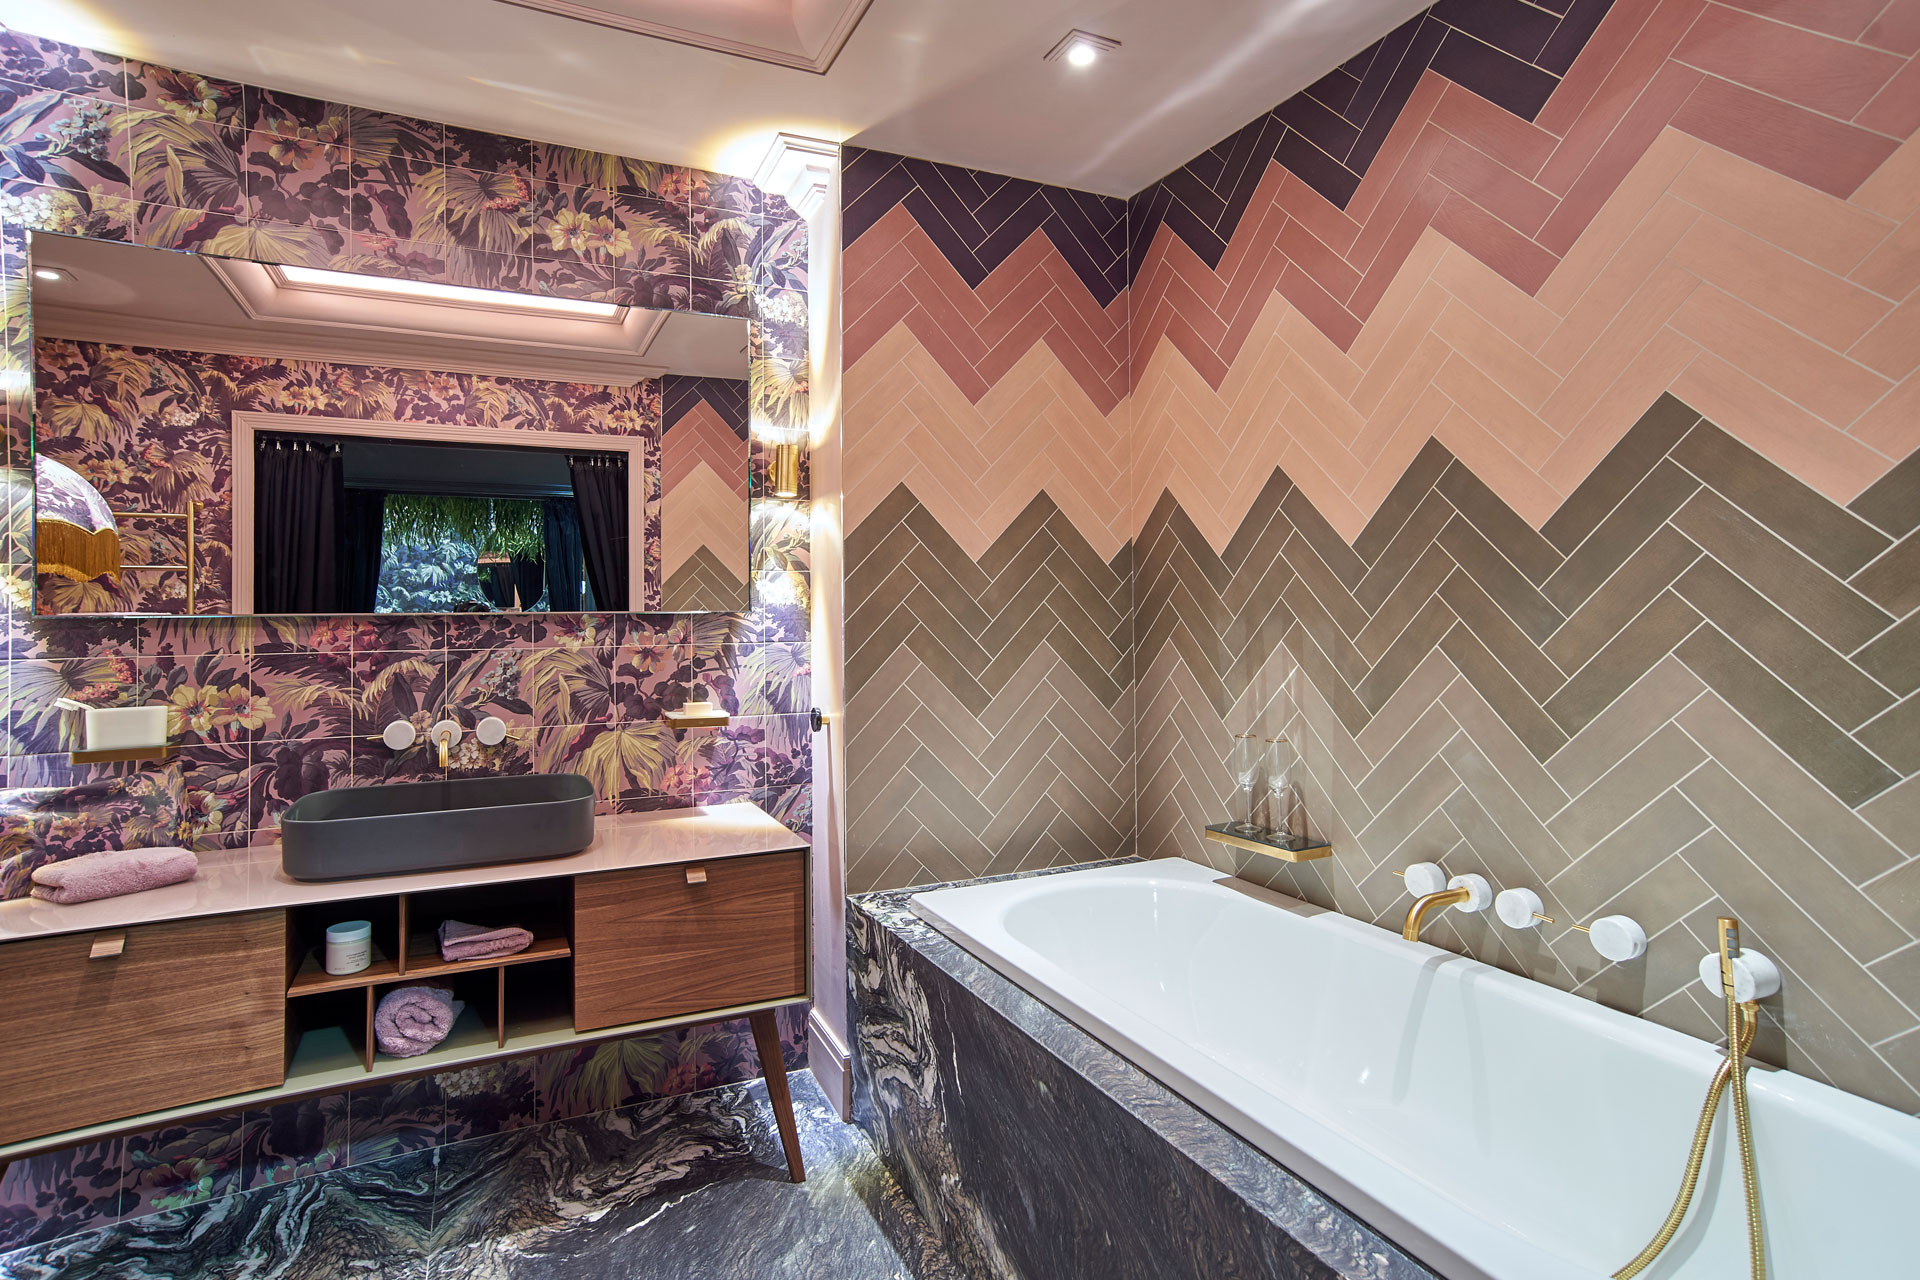 How To Give Your Bathroom a Maximalist Makeover